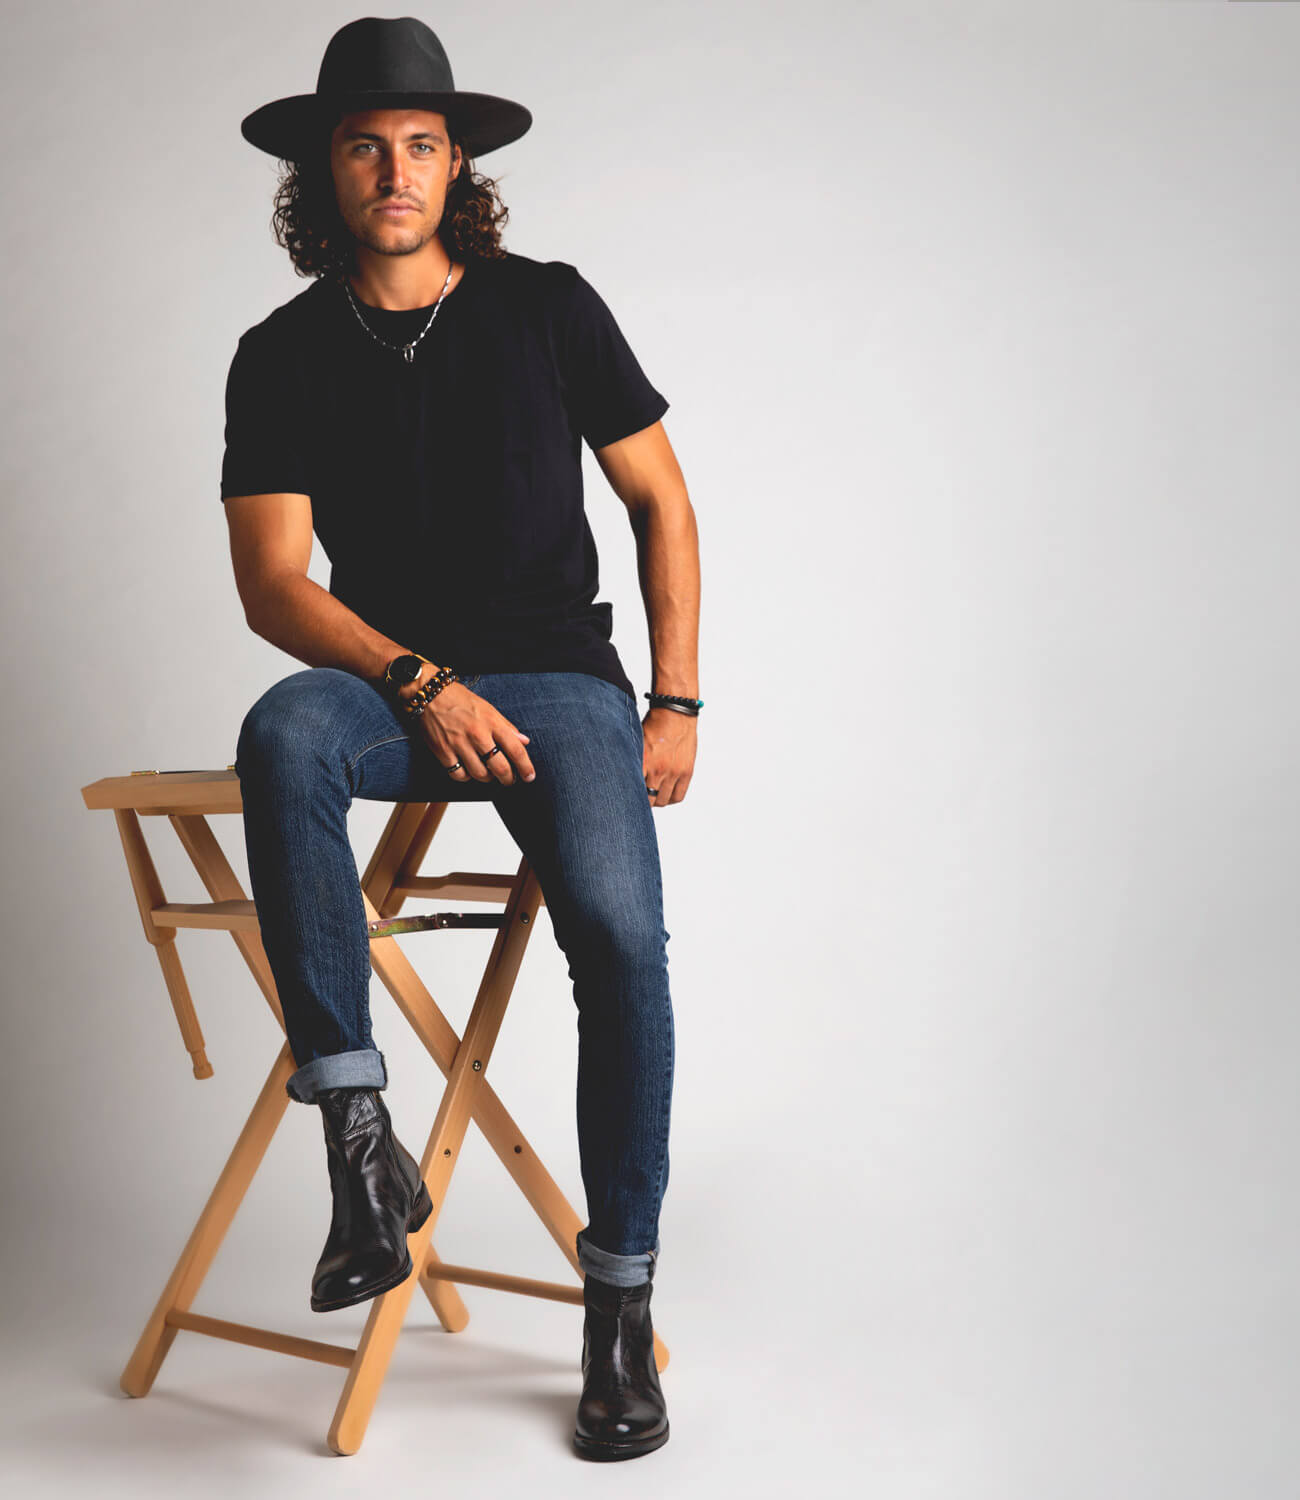 A man in a black outfit and wide-brimmed hat sits on a wooden stool against a gray background, wearing Bed Stu leather ankle boots, looking at the camera.